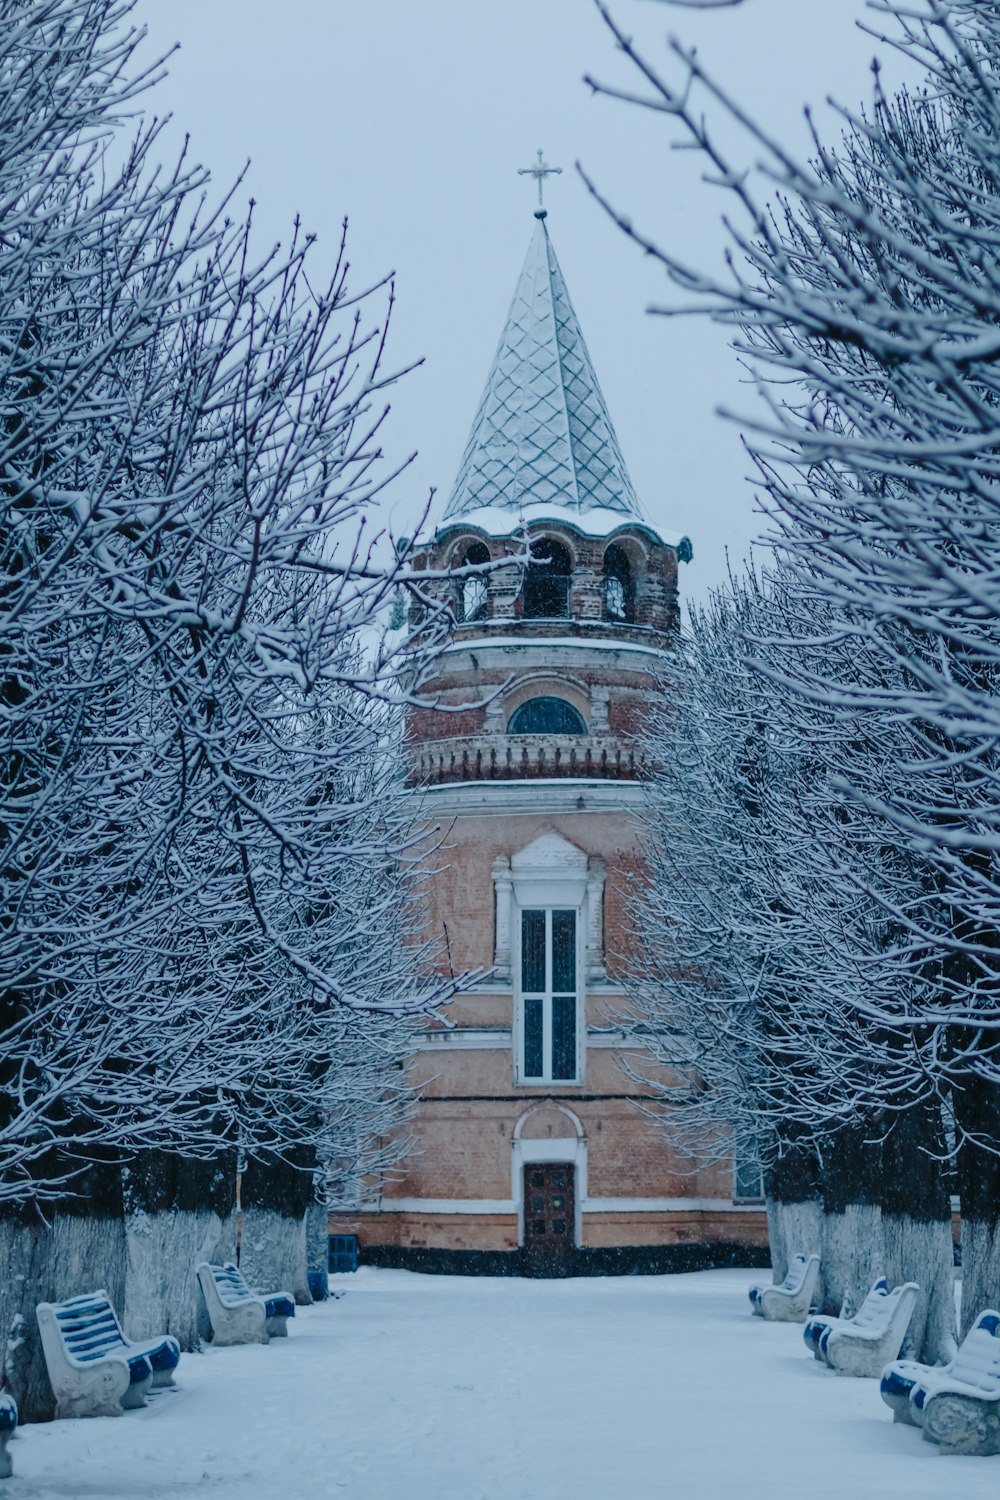 a tower with a clock in the middle of a snowy park